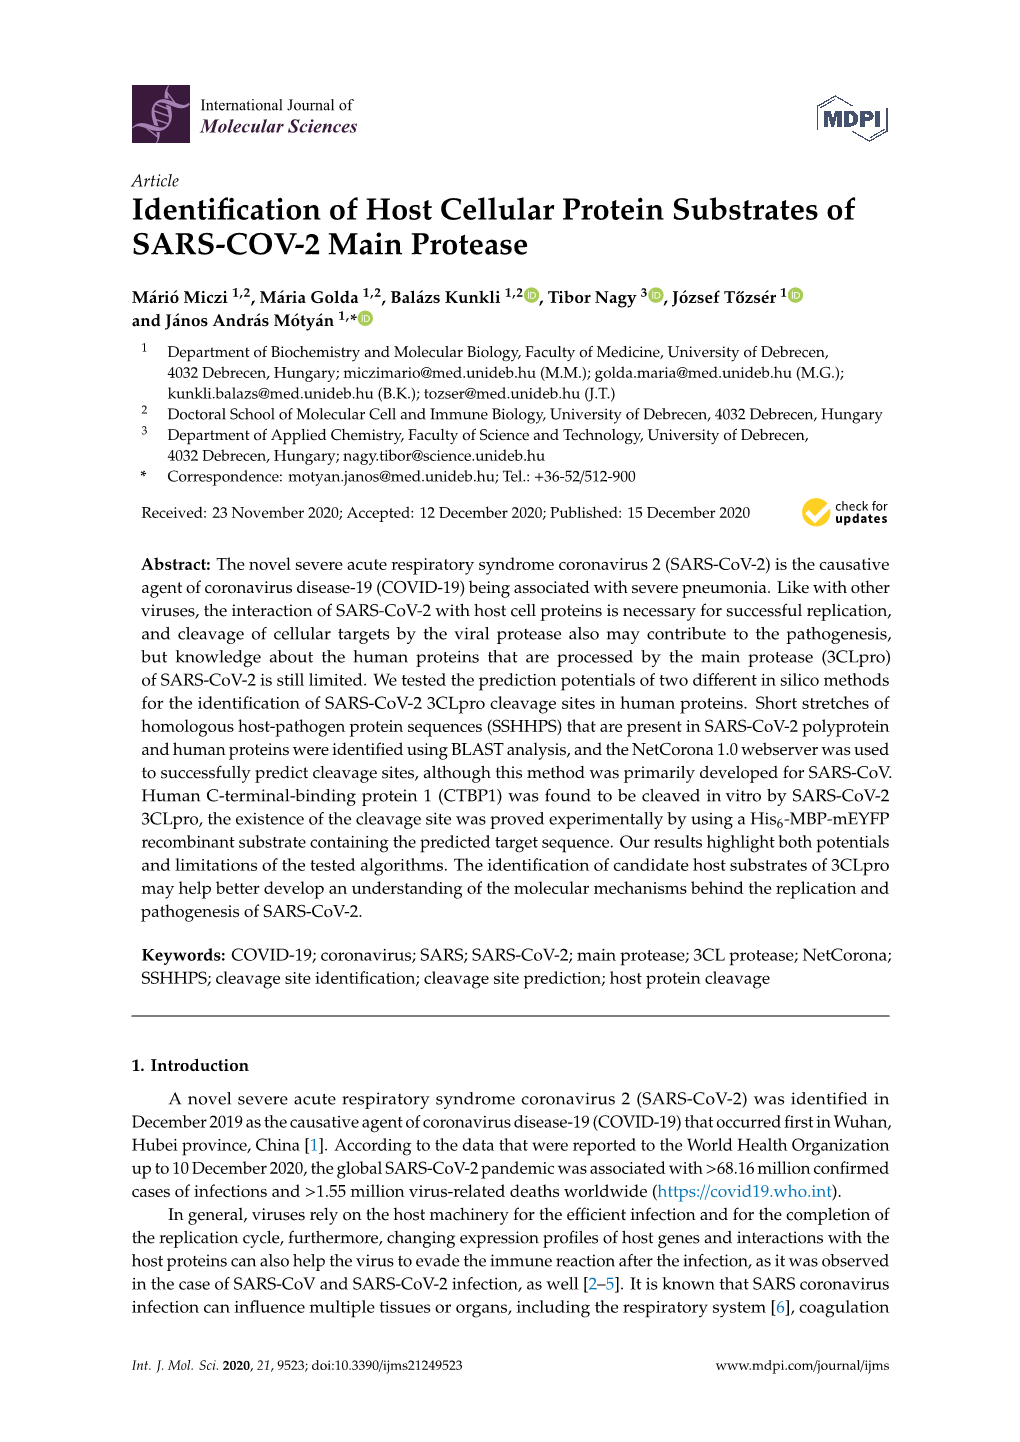 Identification of Host Cellular Protein Substrates of SARS-COV-2 Main Protease